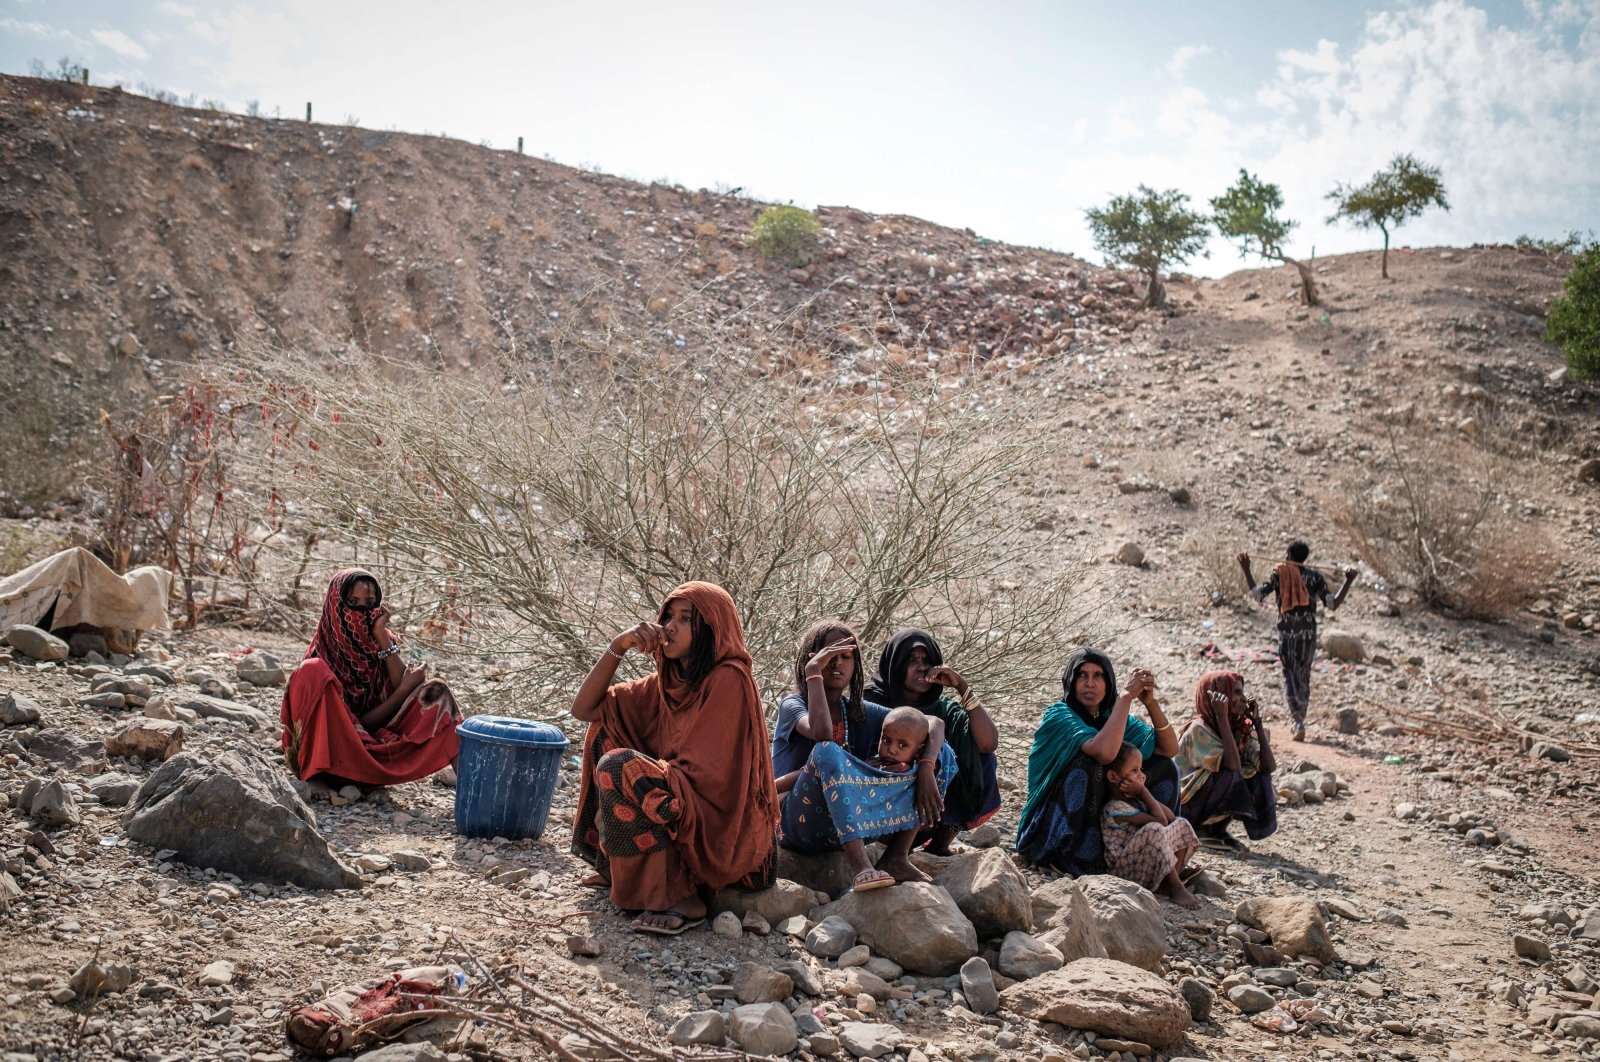 Internally displaced women sit in the makeshift camp where they are sheltered in the village of Erebti, Ethiopia, June 9, 2022. (AFP Photo)